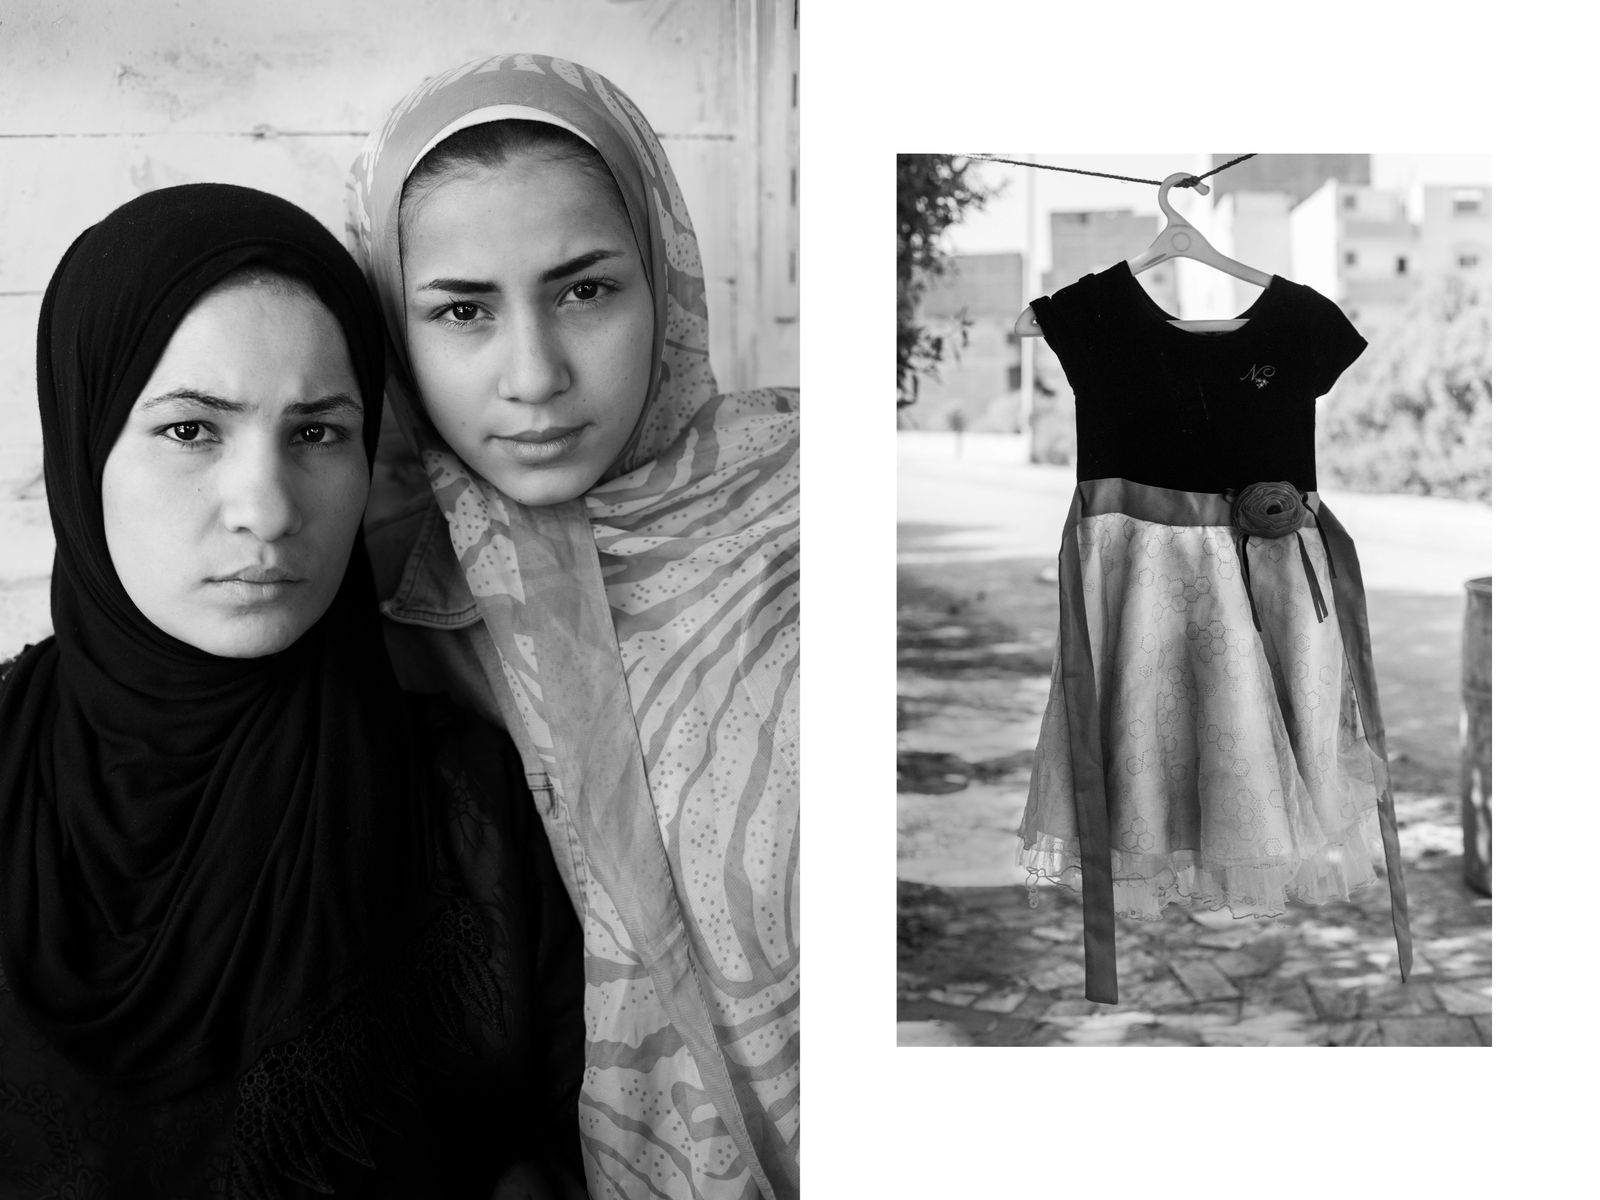 © Lamees Saleh Sharaf Eldin - Image from the Indefinitely photography project